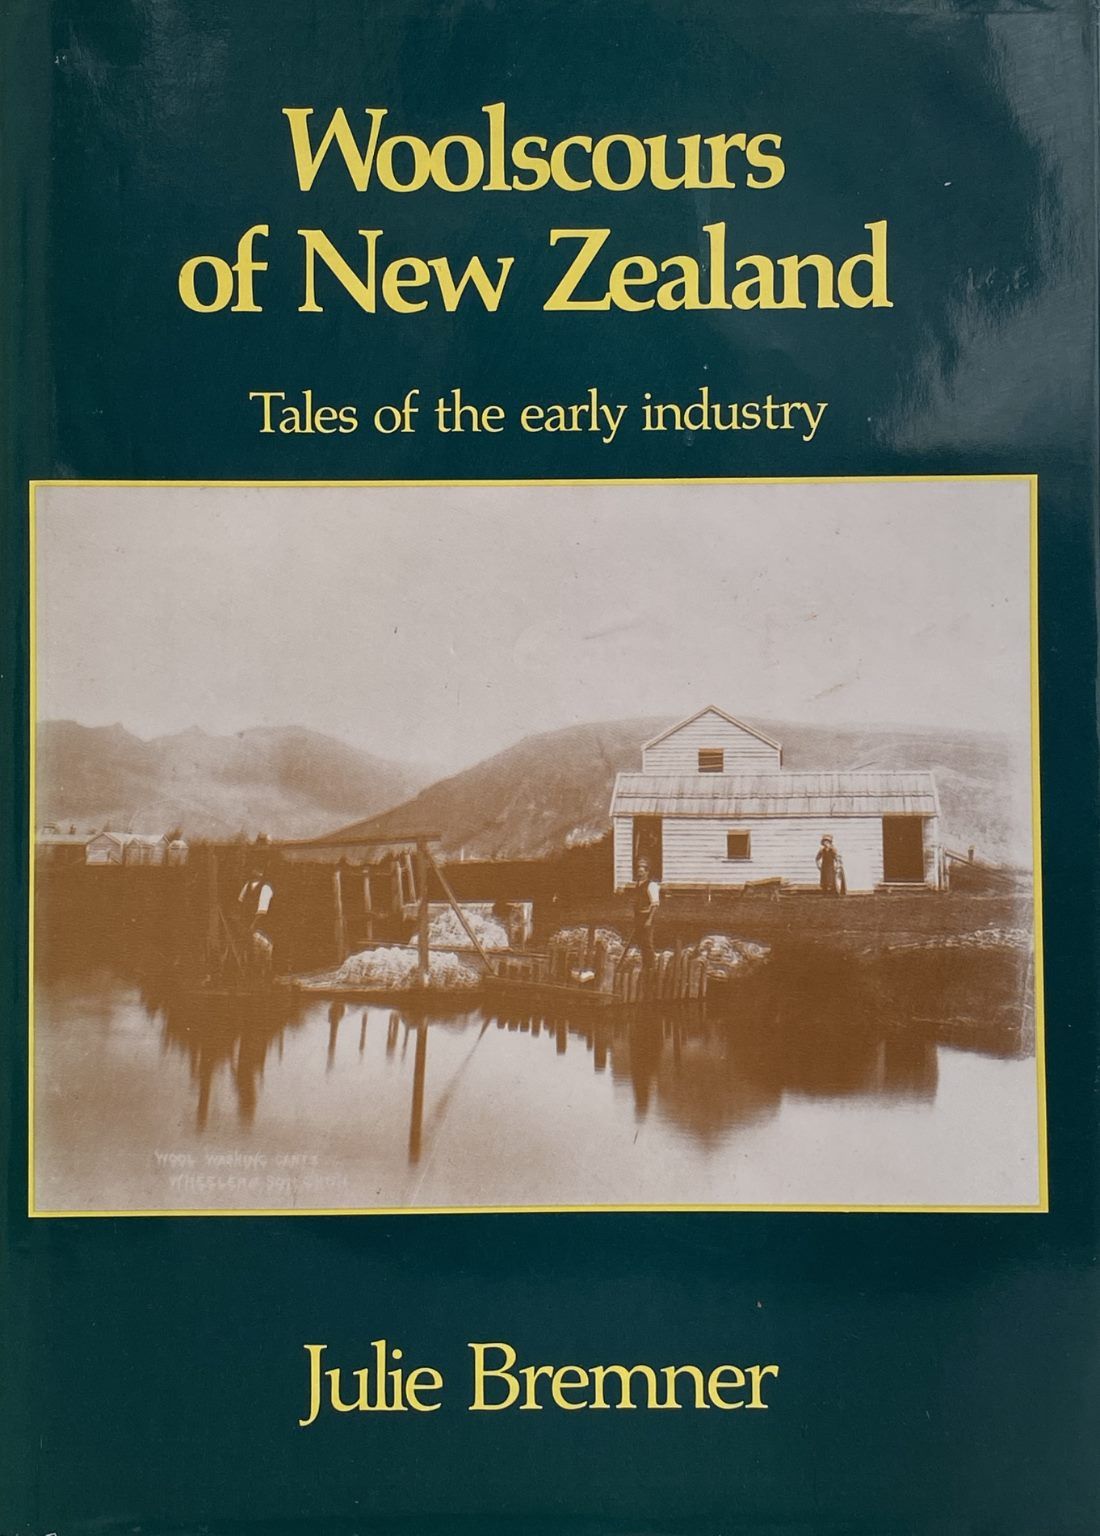 WOOLSCOURS OF NEW ZEALAND: Tales of The Early Industry